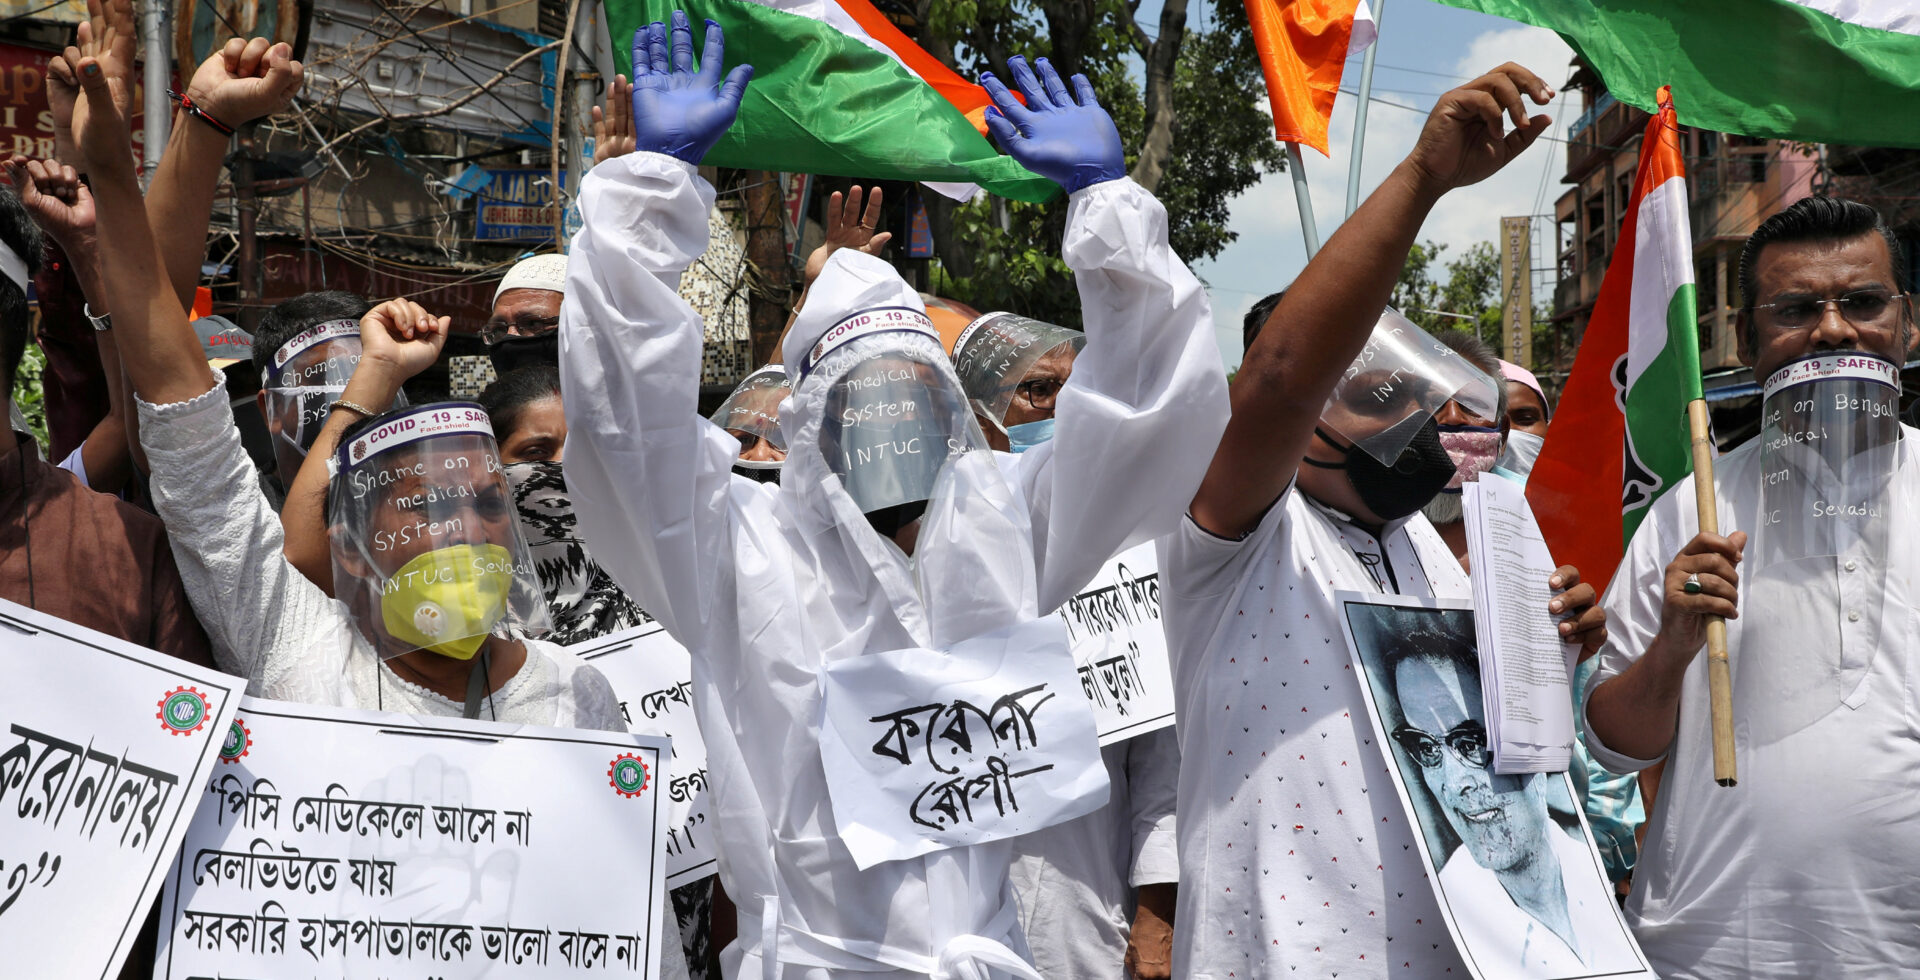 Protesters demanding better treatment for people infected with COVID-19 in India